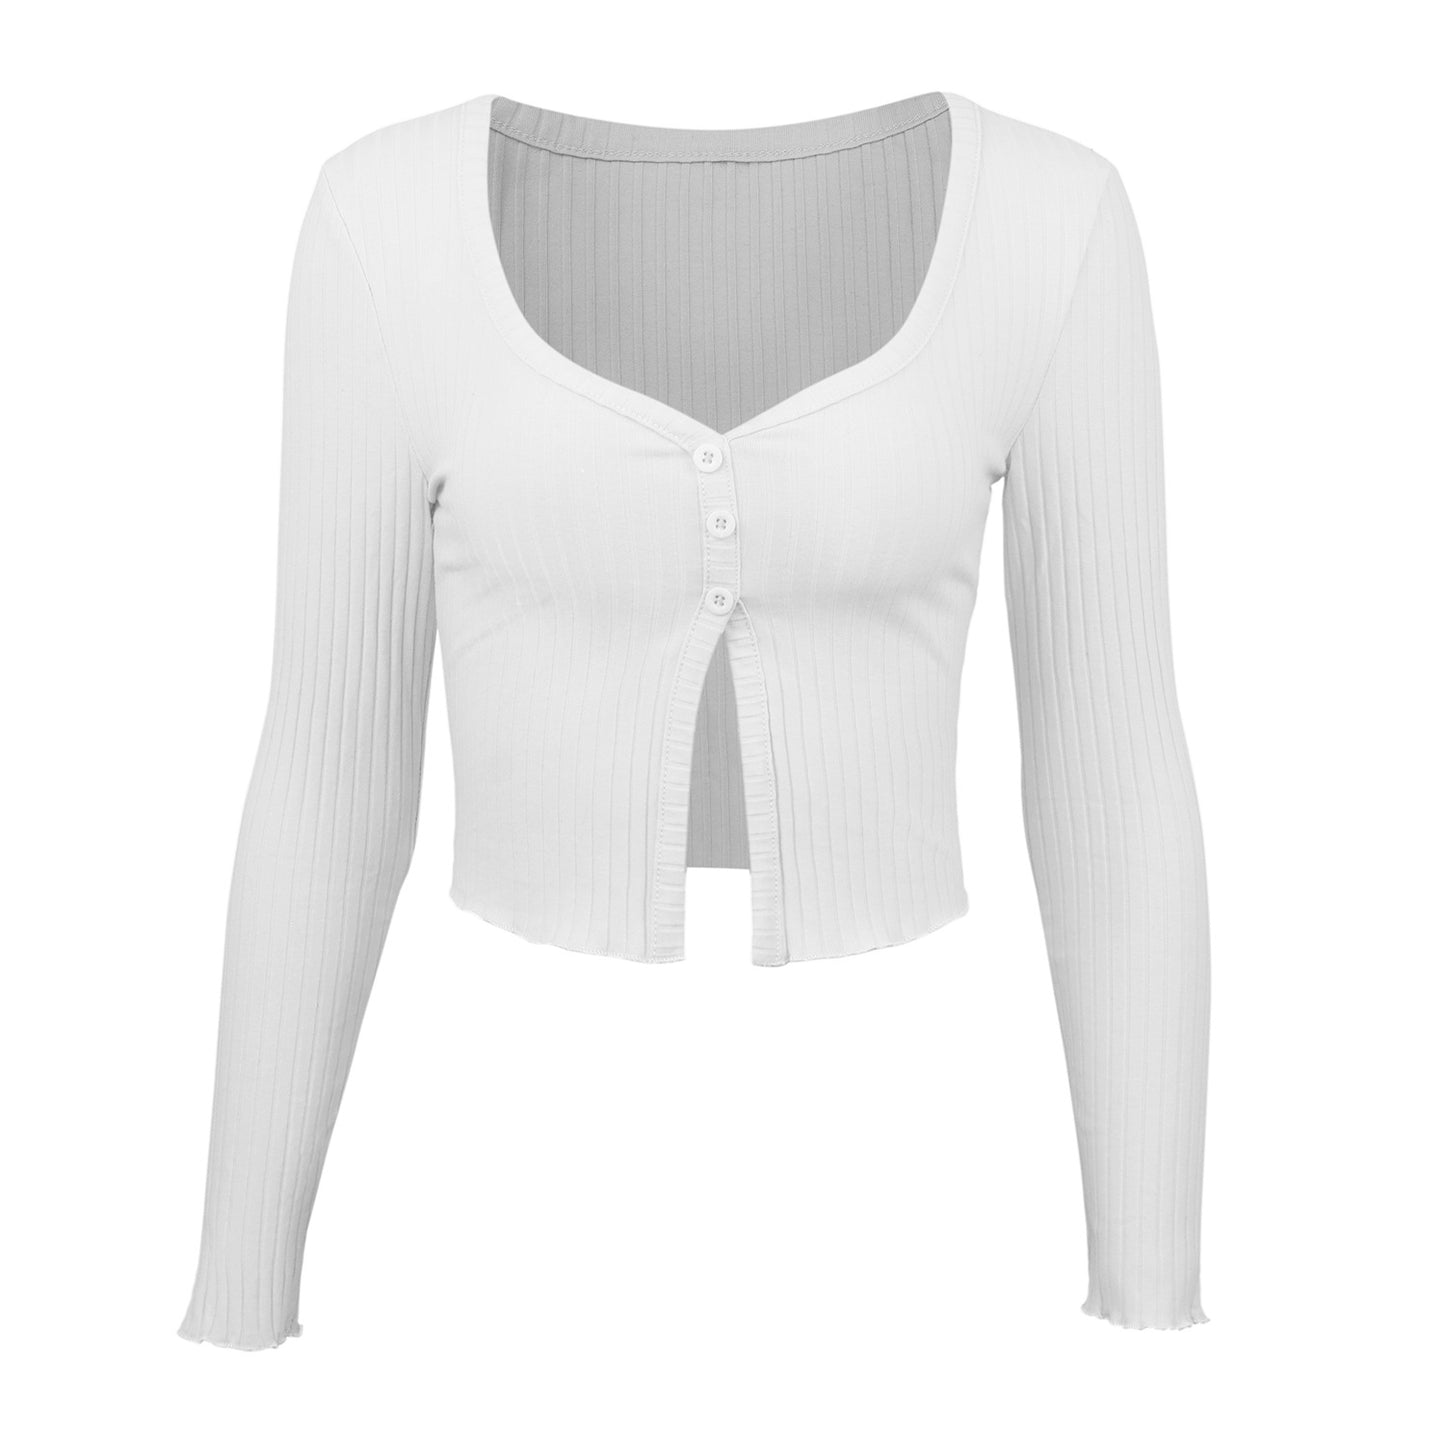 Buttoned Charm Knit Crop